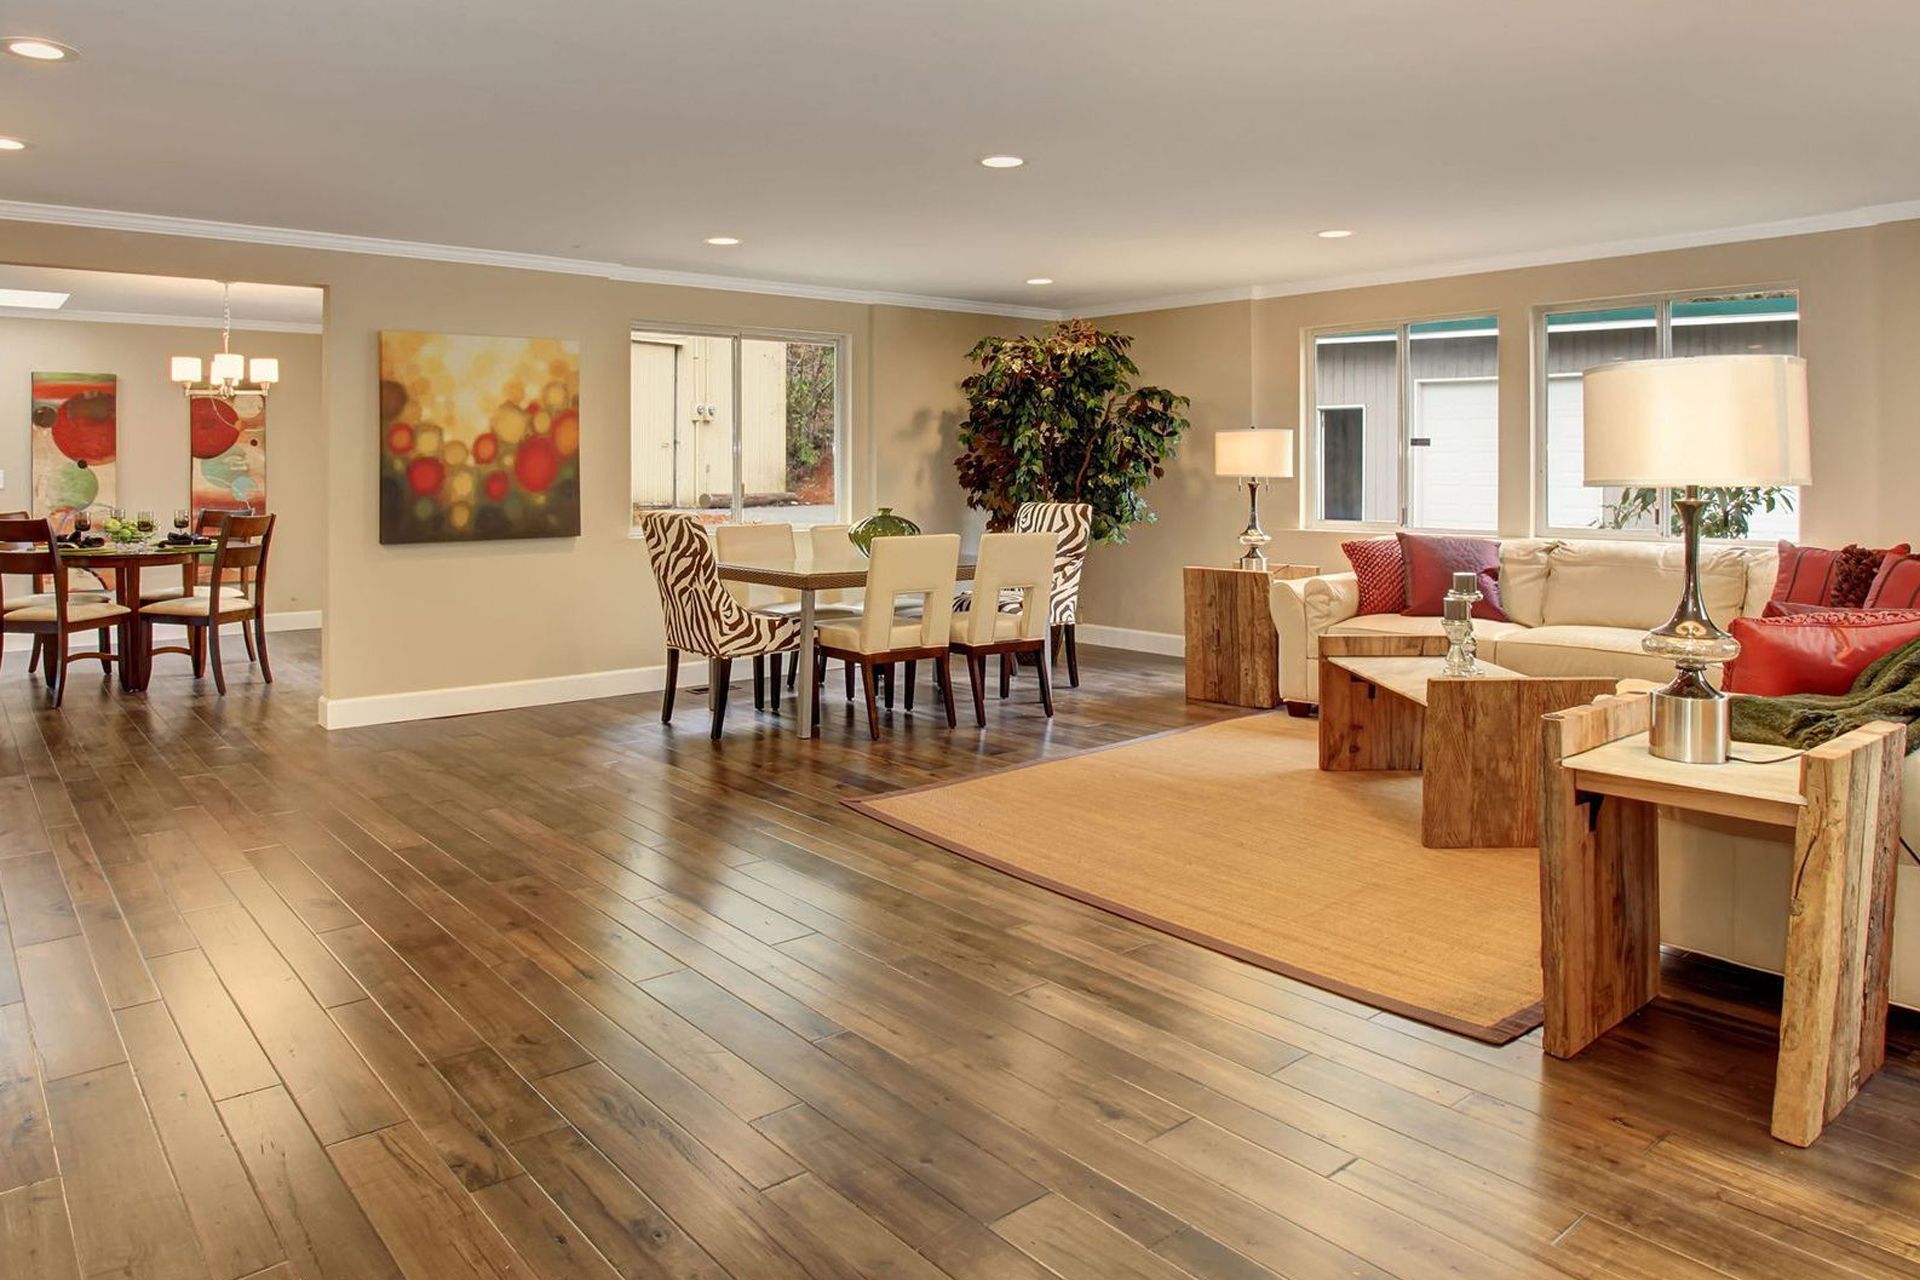 A living room with hardwood floors and a dining room in the background